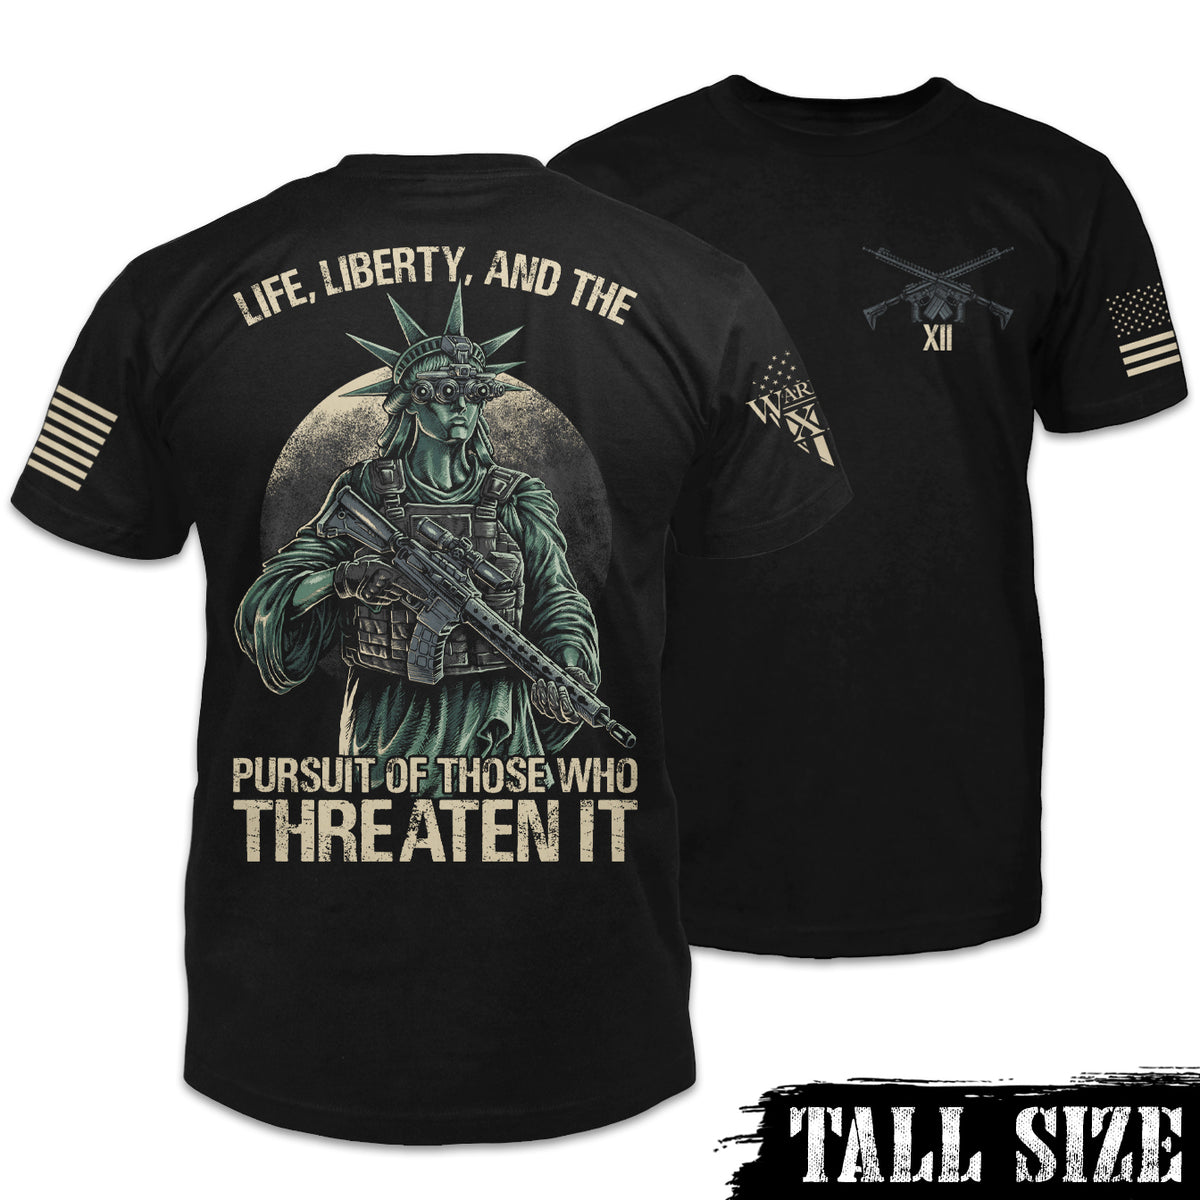 Front and back black tall size shirt with the words "Life, liberty, and the pursuit of those who threaten it" with the statue of liberty holding a gun printed on the shirt.